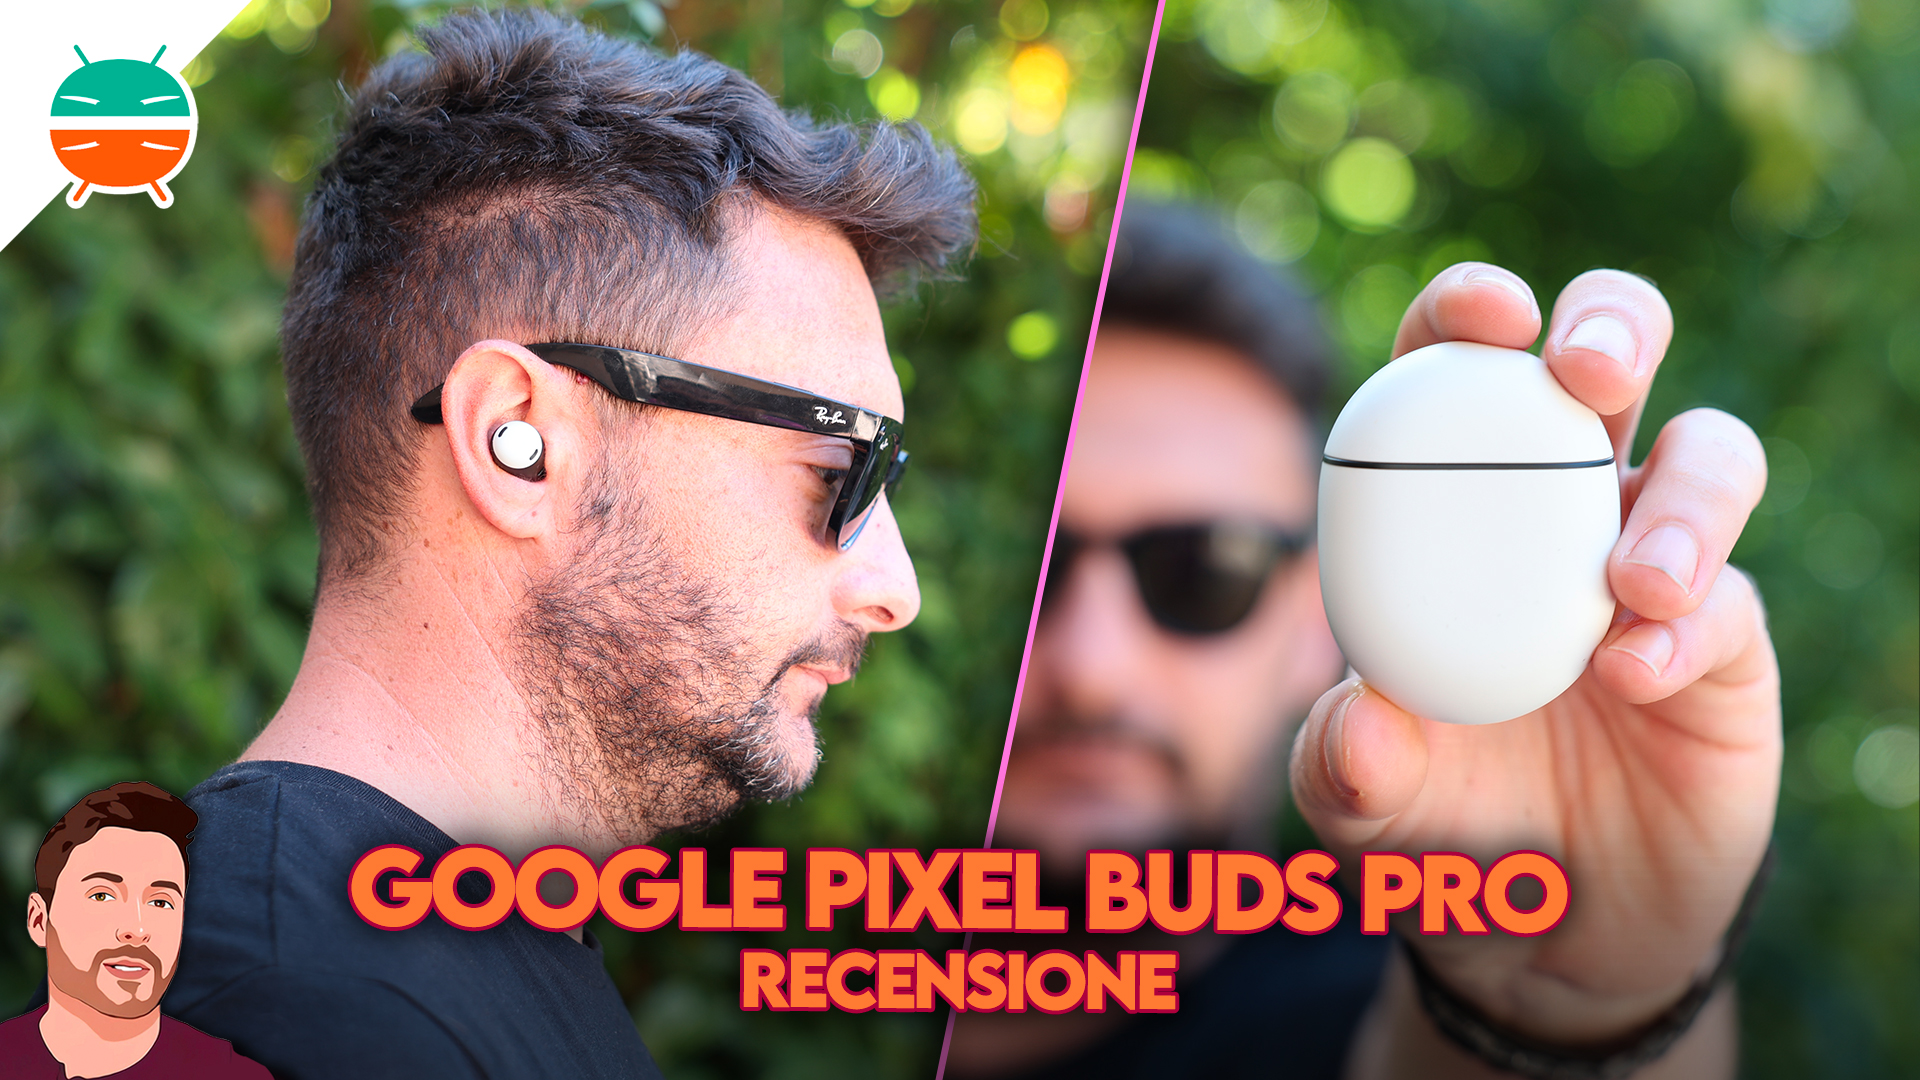 Google Pixel Buds Pro review: pros and cons features - GizChina.it